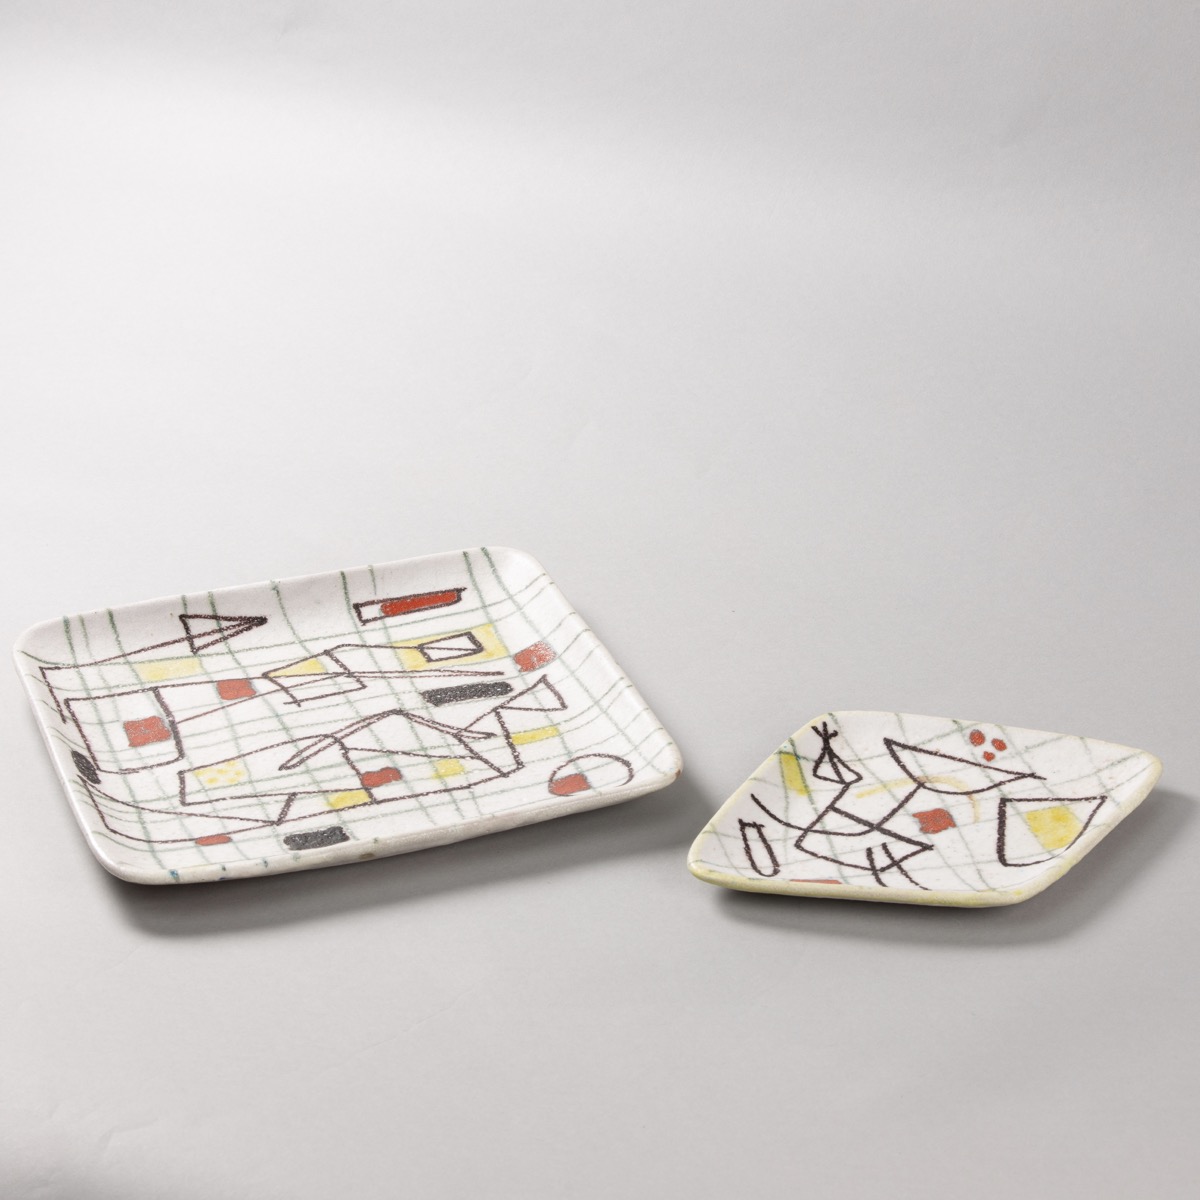 ceramic plate with abstract decor by Guido Gambione - img06